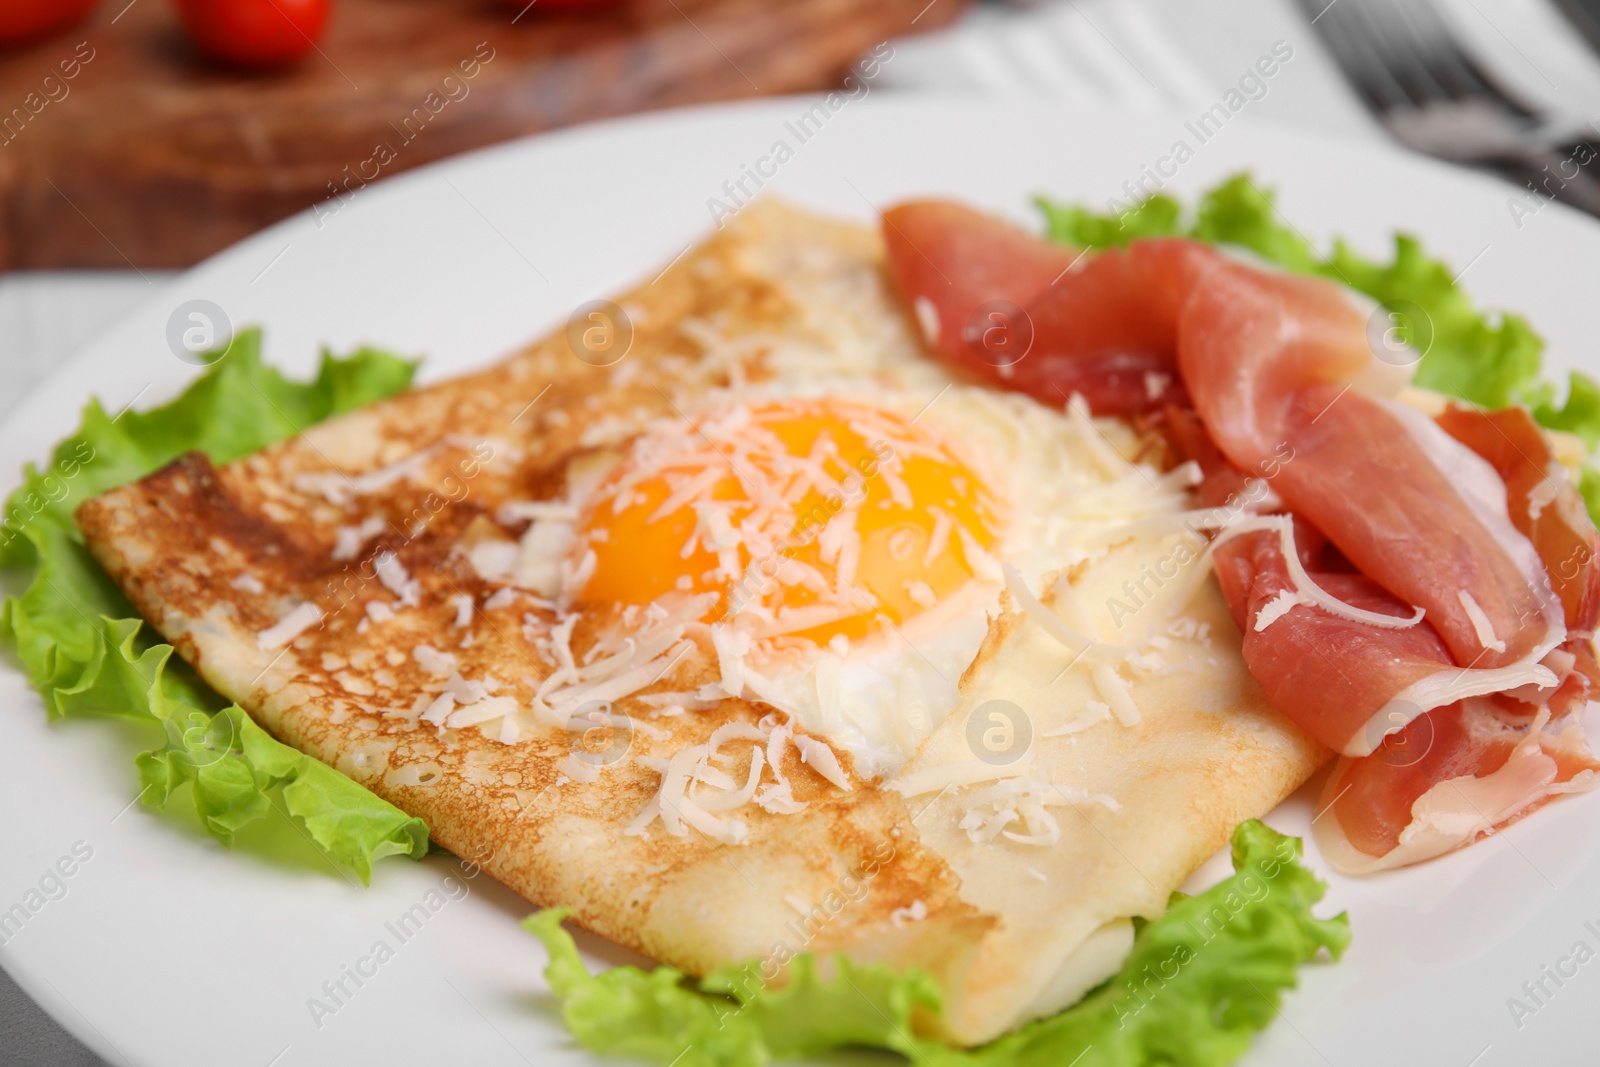 Photo of Delicious crepe with egg on plate, closeup. Breton galette